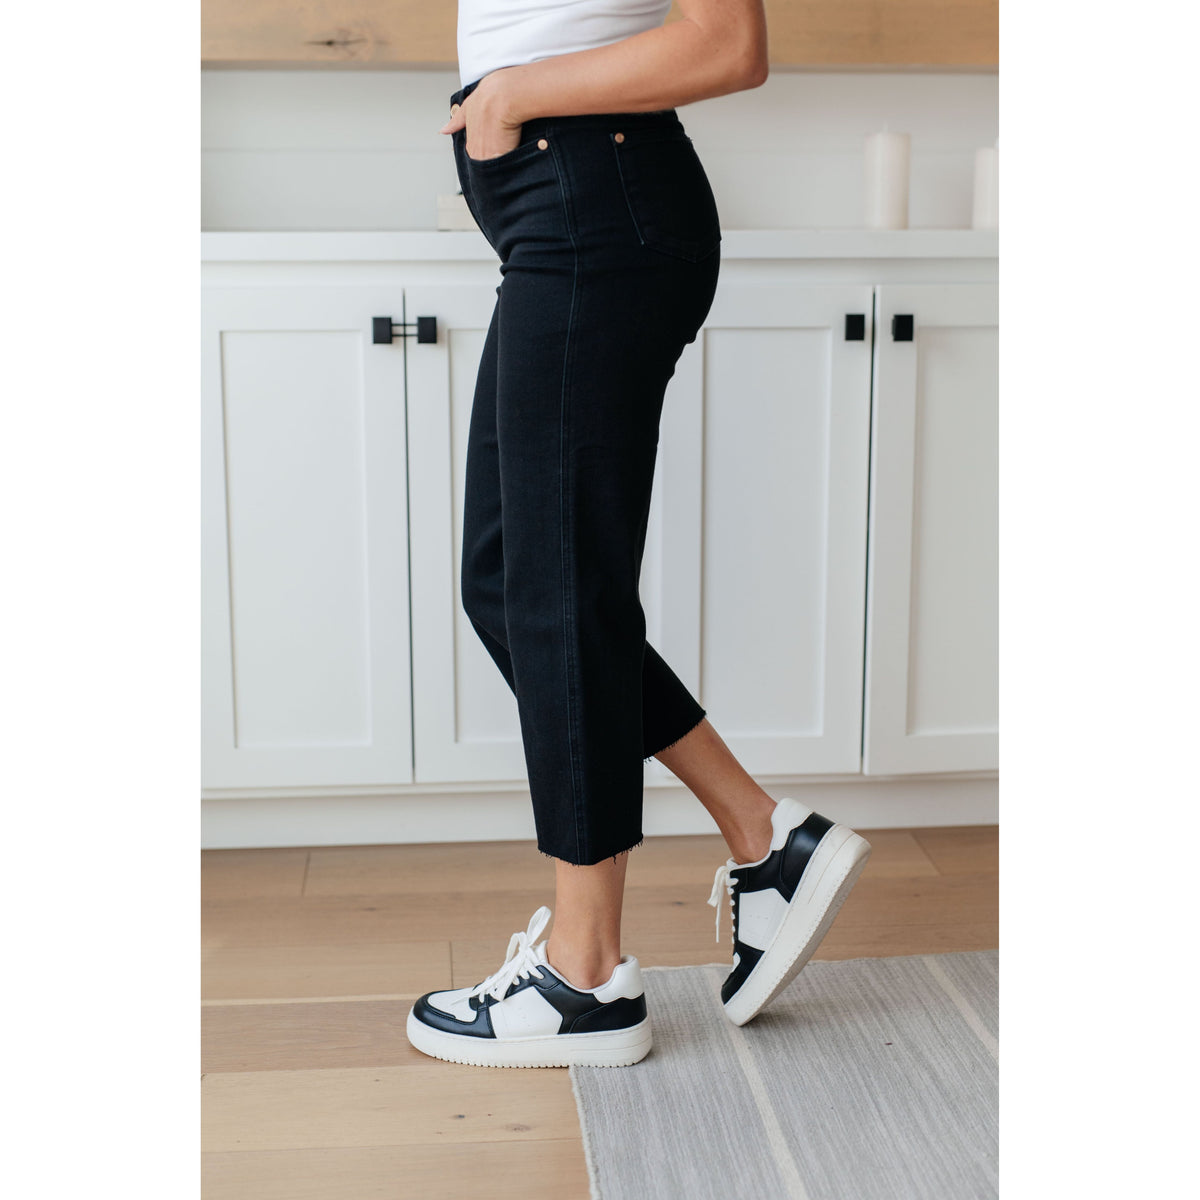 Judy Blue | Lizzy High Rise Control Top Wide Leg Crop Jeans in Black